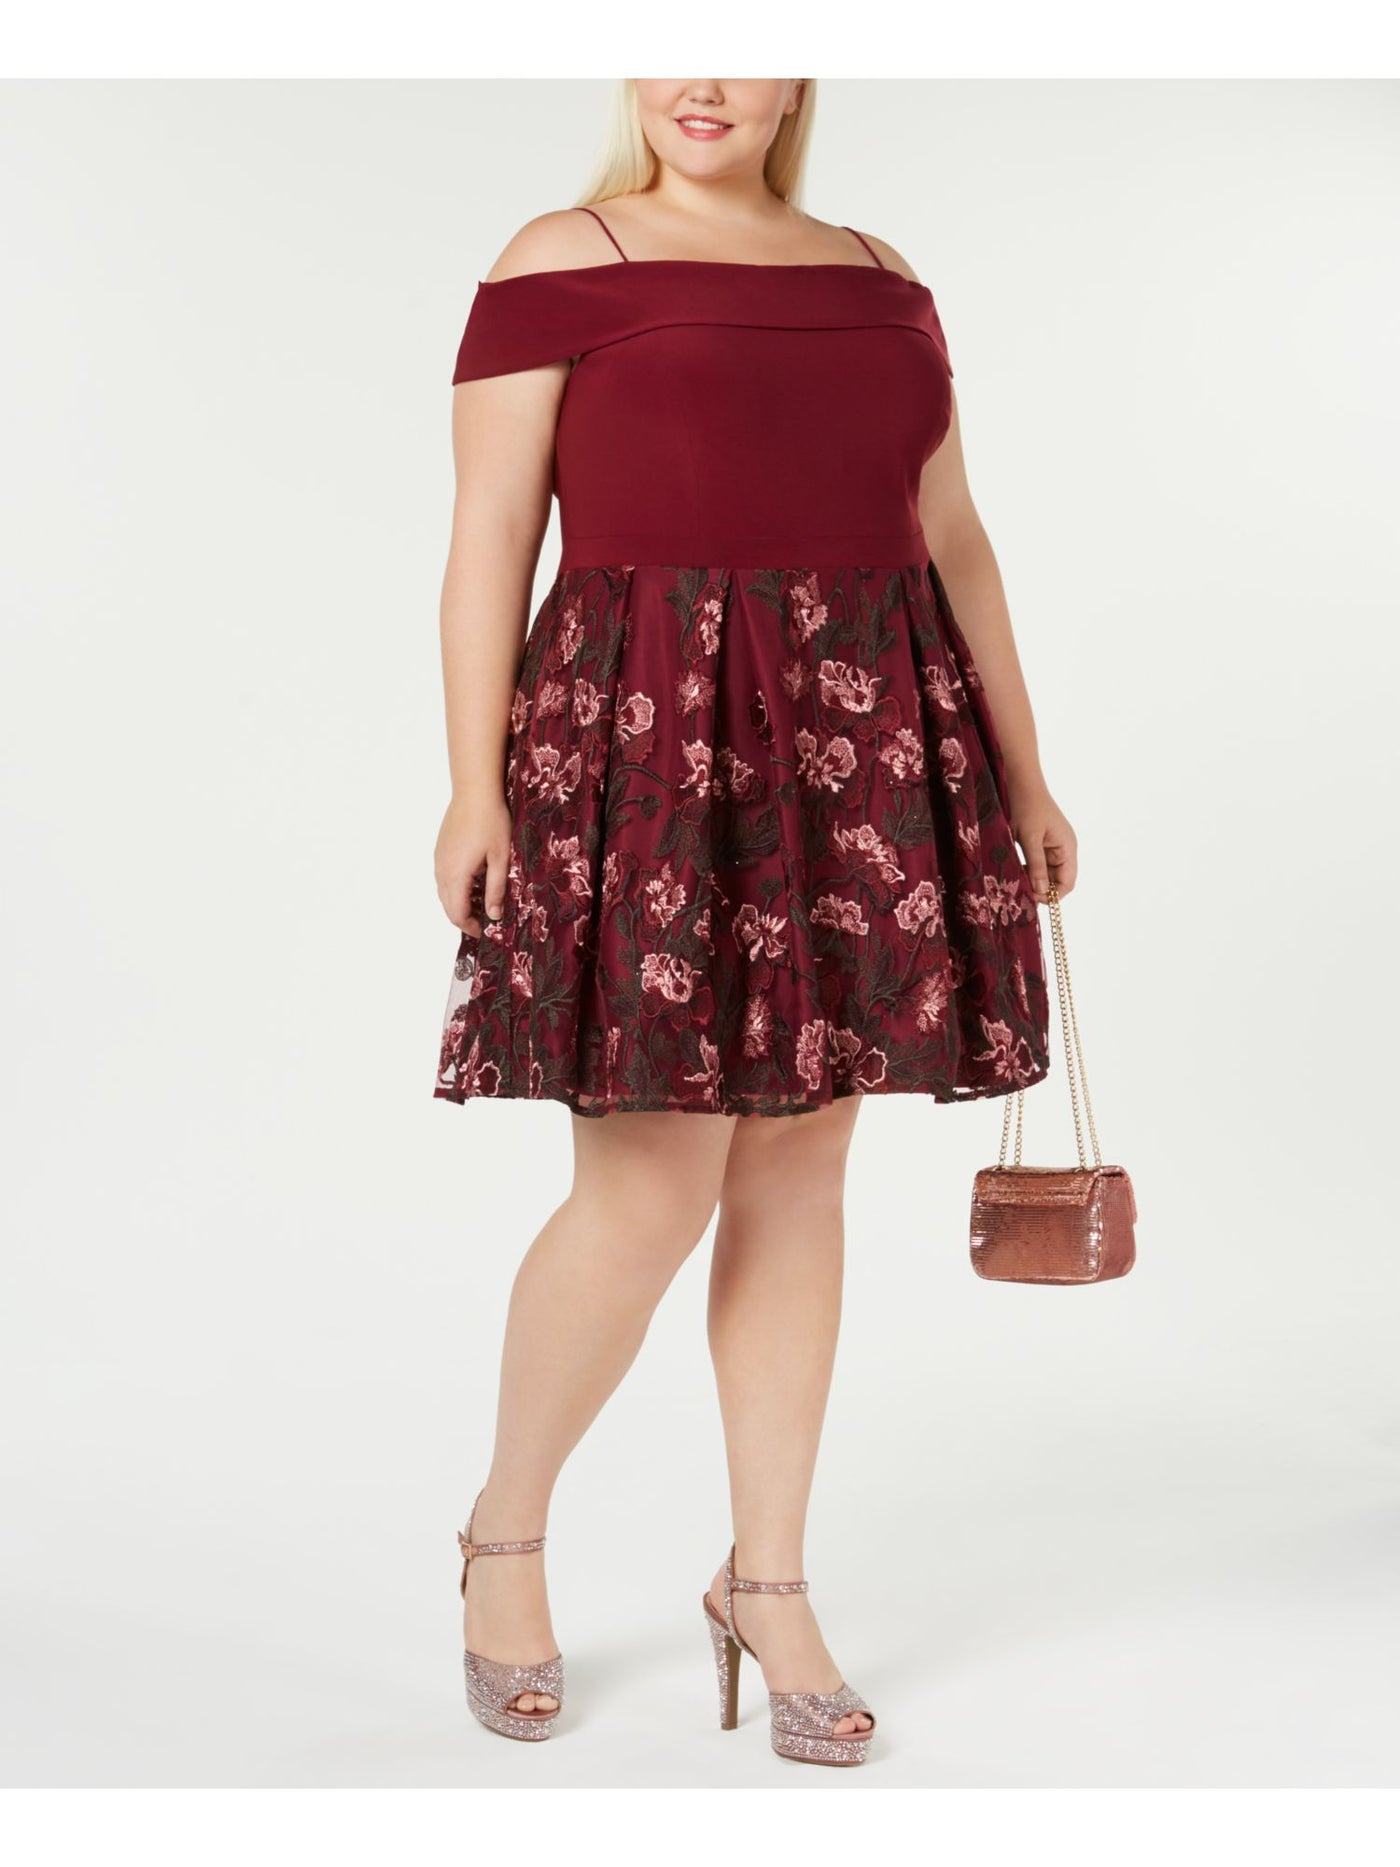 MORGAN & CO Womens Maroon Pleated Floral Spaghetti Strap Off Shoulder Above The Knee Party Circle Dress Plus 22W